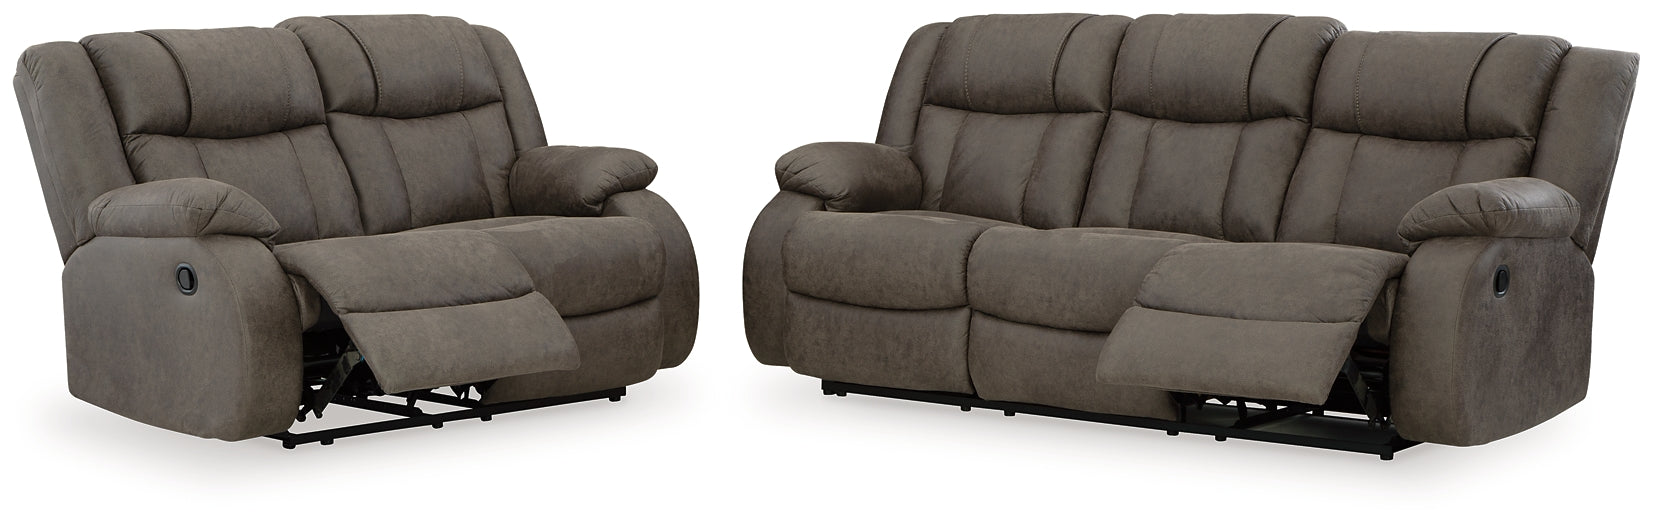 First Base Sofa and Loveseat JR Furniture Store